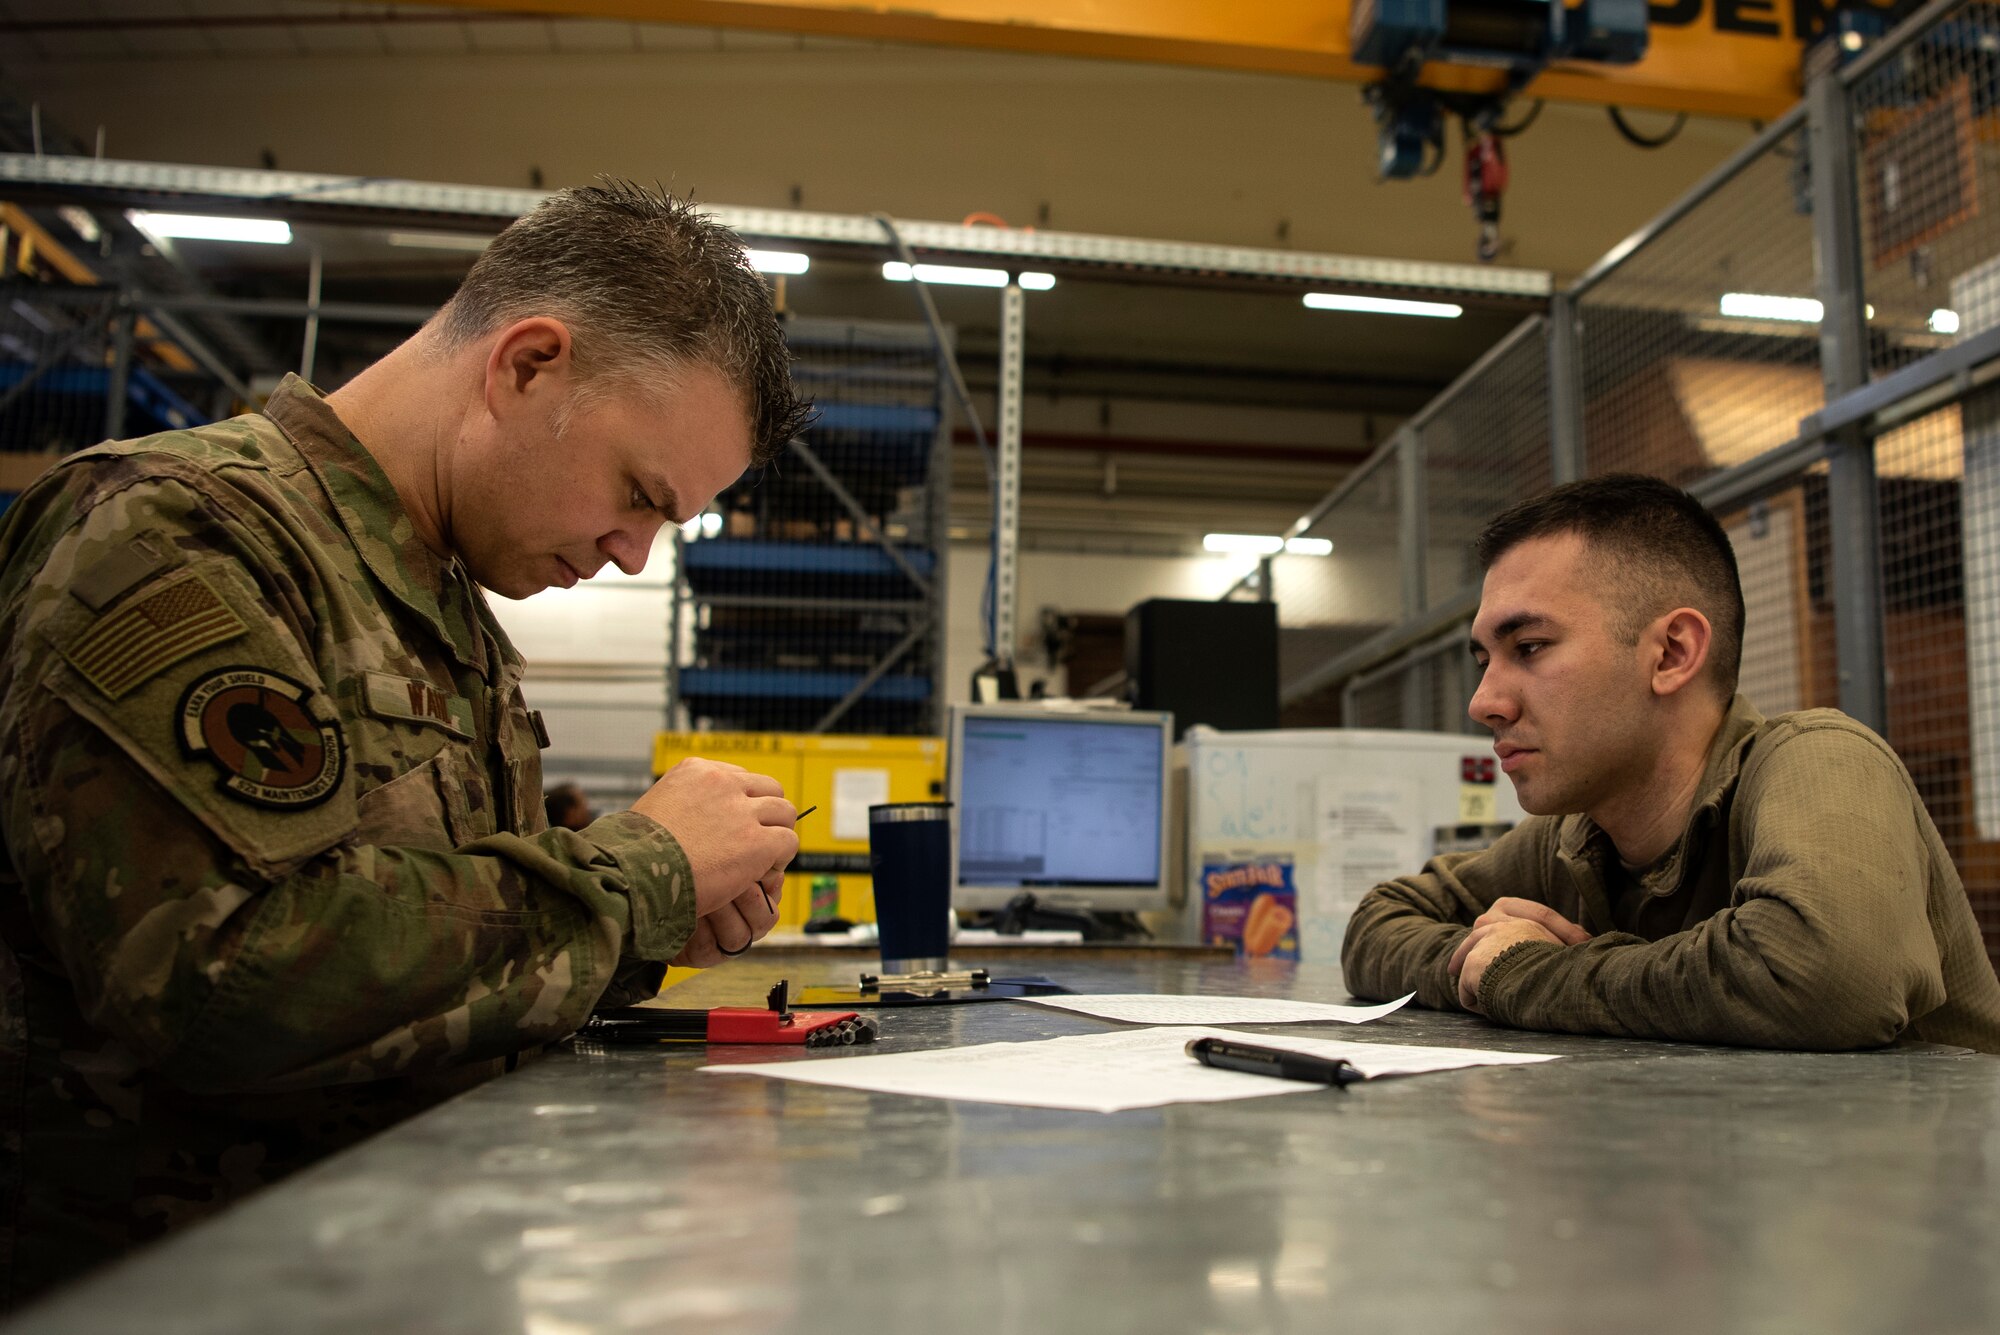 U.S. Air Force Master Sgt. Charles Wahl, 52nd Maintenance Squadron support section chief, left, and Senior Airman Ryan Cruz, 52nd MXS aerospace propulsion journeyman, right, inspect equipment prior to it being issued from the support section at Spangdahlem Air Base, Germany, Feb. 25, 2020. The 52nd MXS Propulsion Flight support section provides parts for jet engine buildup and repair. (U.S. Air Force photo by Airman 1st Class Valerie Seelye)